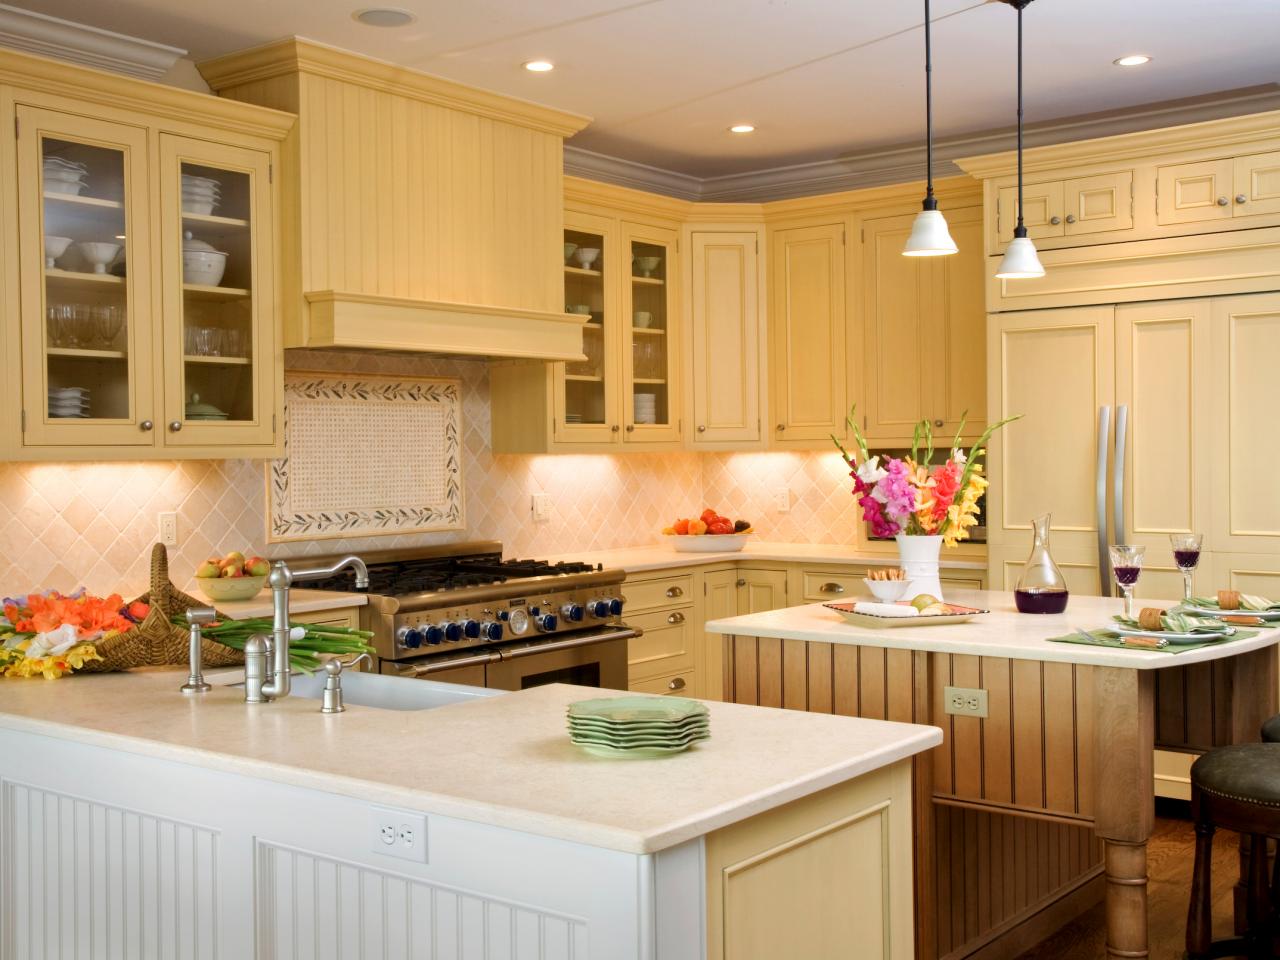 Modern Kitchen Paint Colors: Pictures & Ideas From HGTV | HGTV